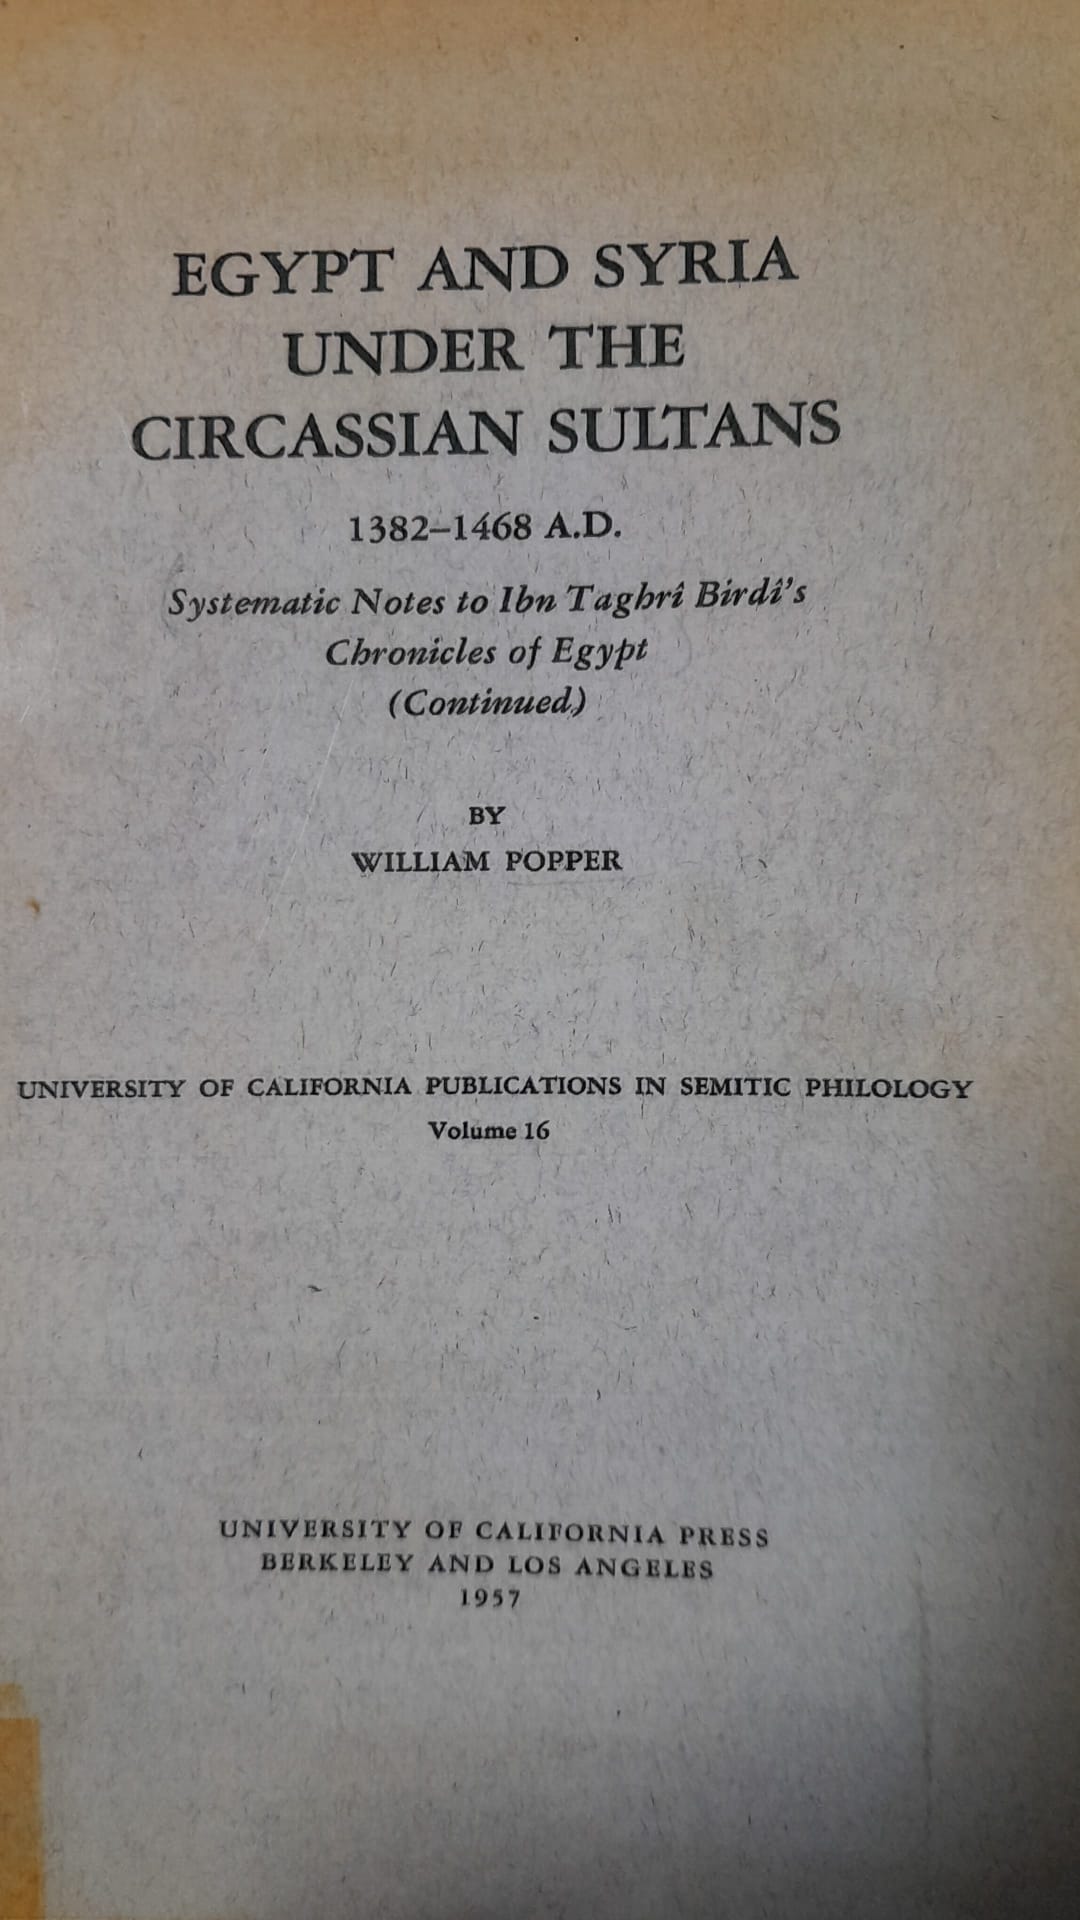 EGYPT AND SYRIA UNDER THE CIRCASSIAN SULTANS VOL 16